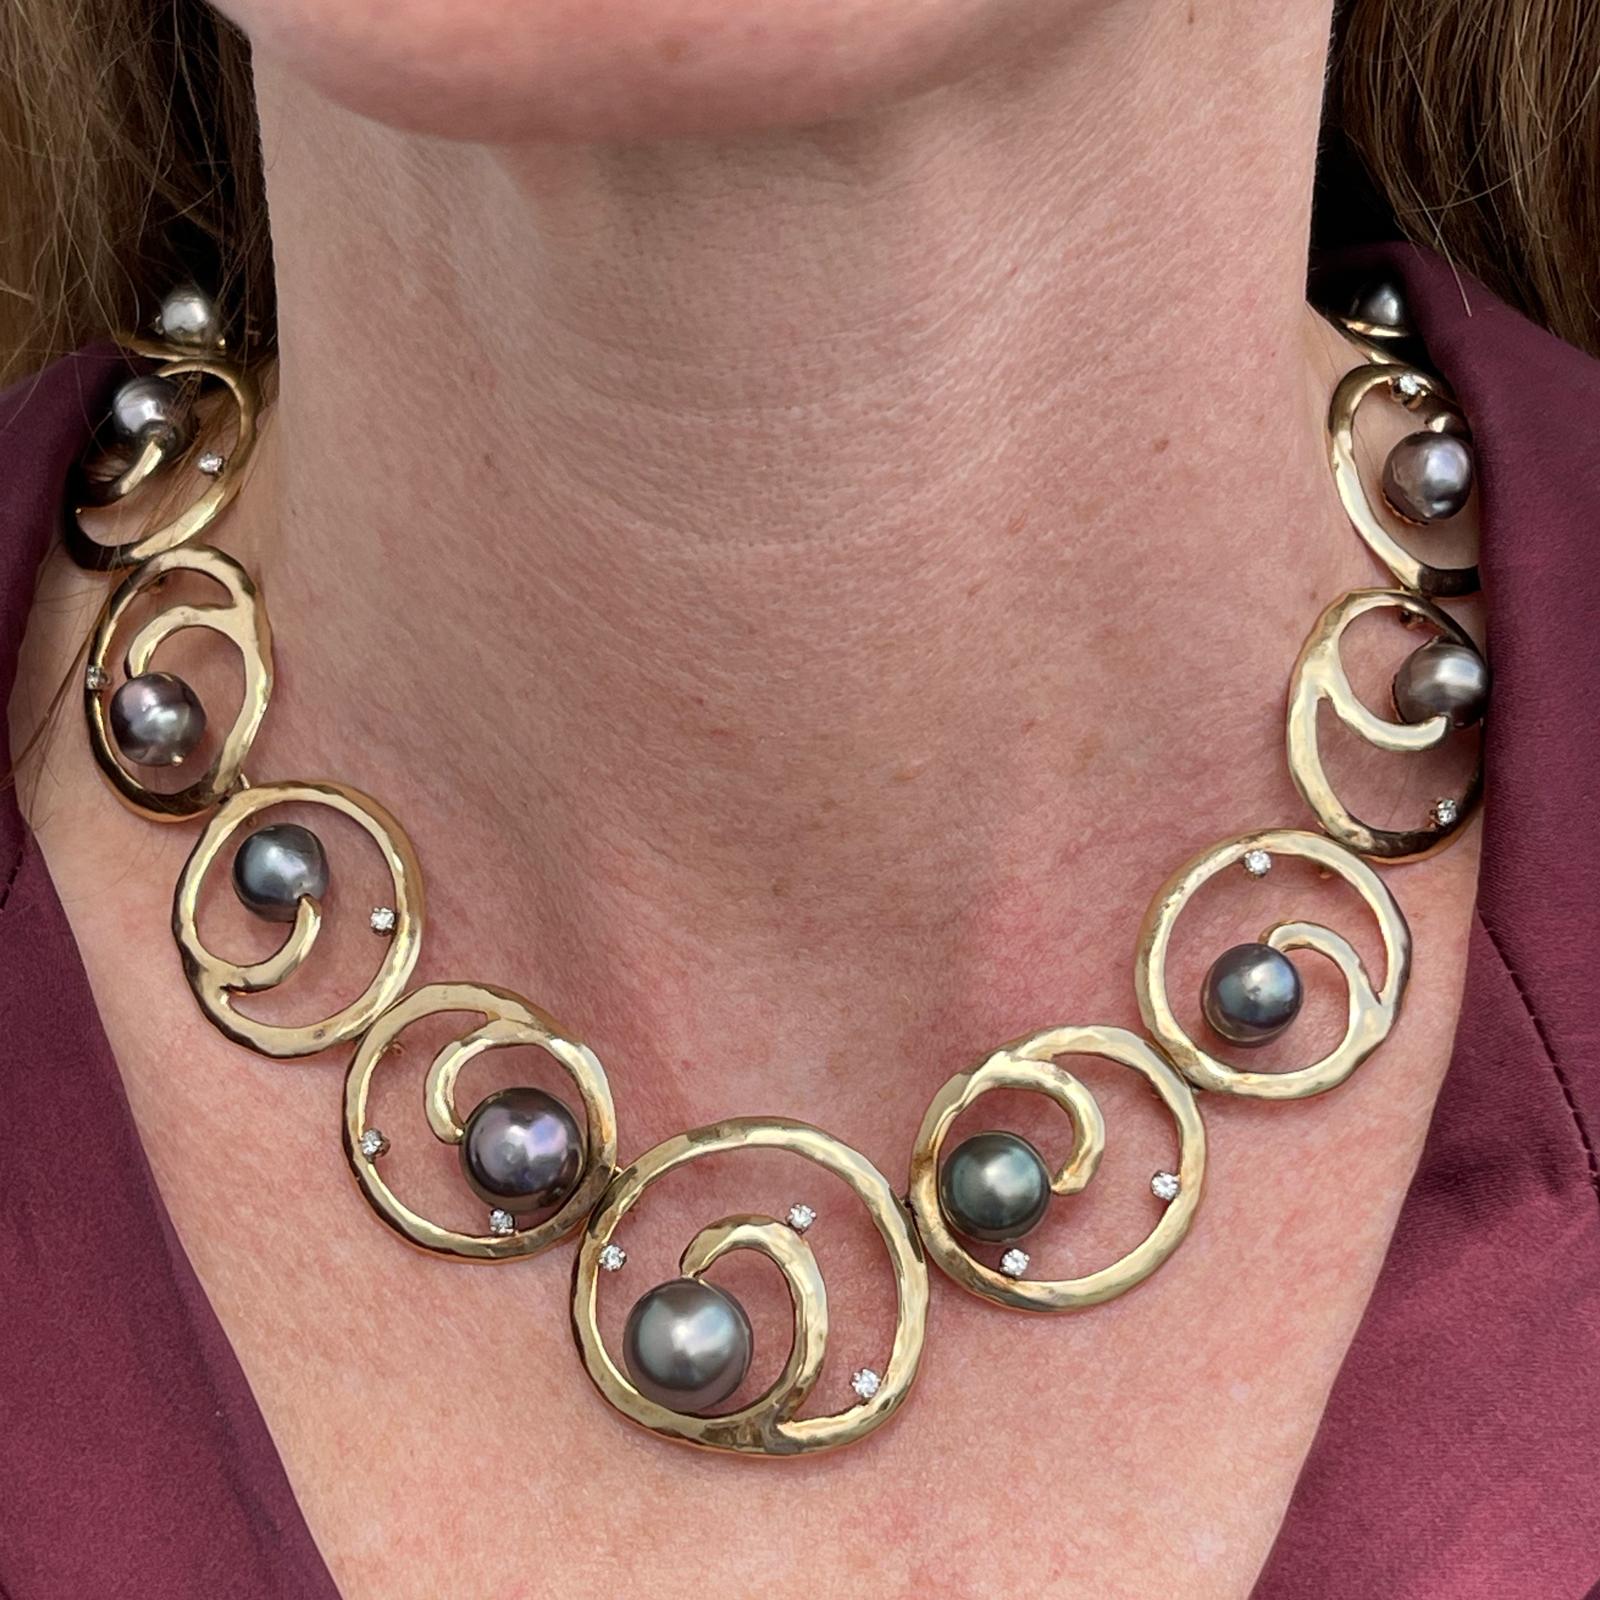 South Sea pearl and diamond necklace handcrafted in 14 karat yellow gold. The open circle links feature 21 round brilliant cut diamonds and 17 South Sea pearls. The diamonds weigh approximately .75 CTW and are graded G-H color and SI2 clarity. The